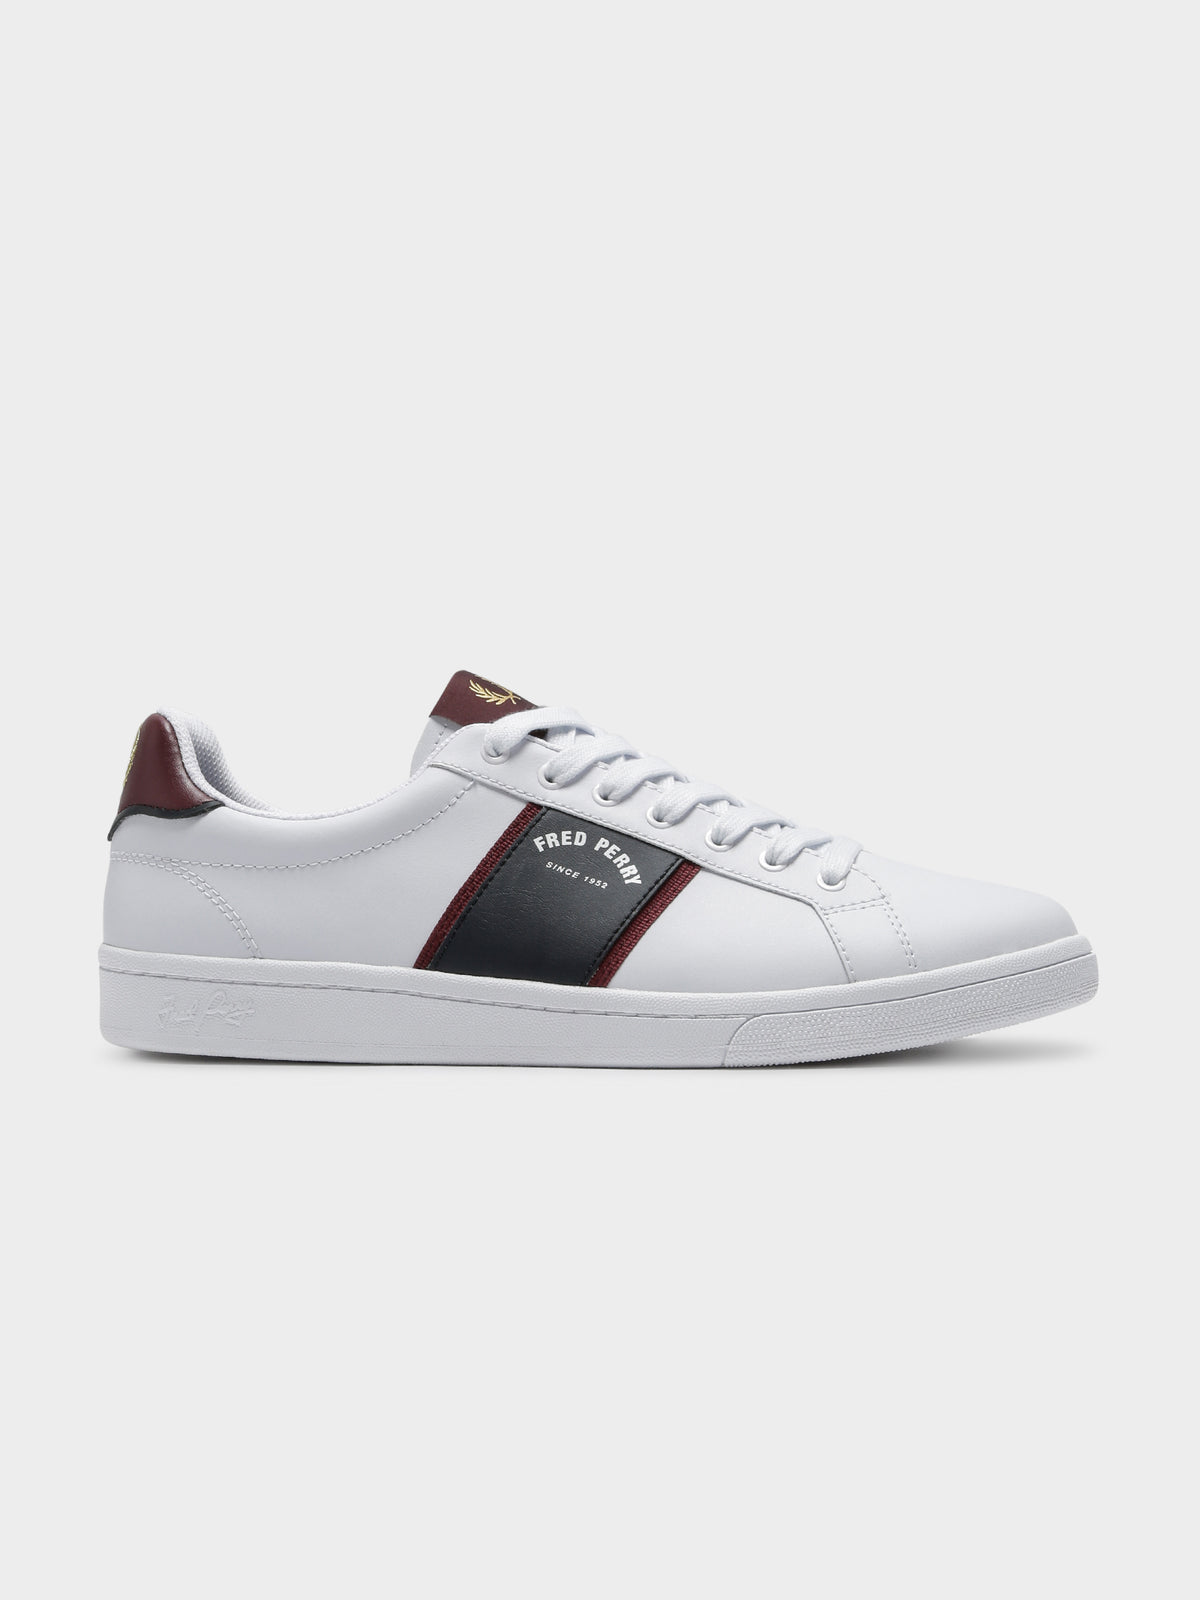 Mens B721 Arch Branded Sneakers in White